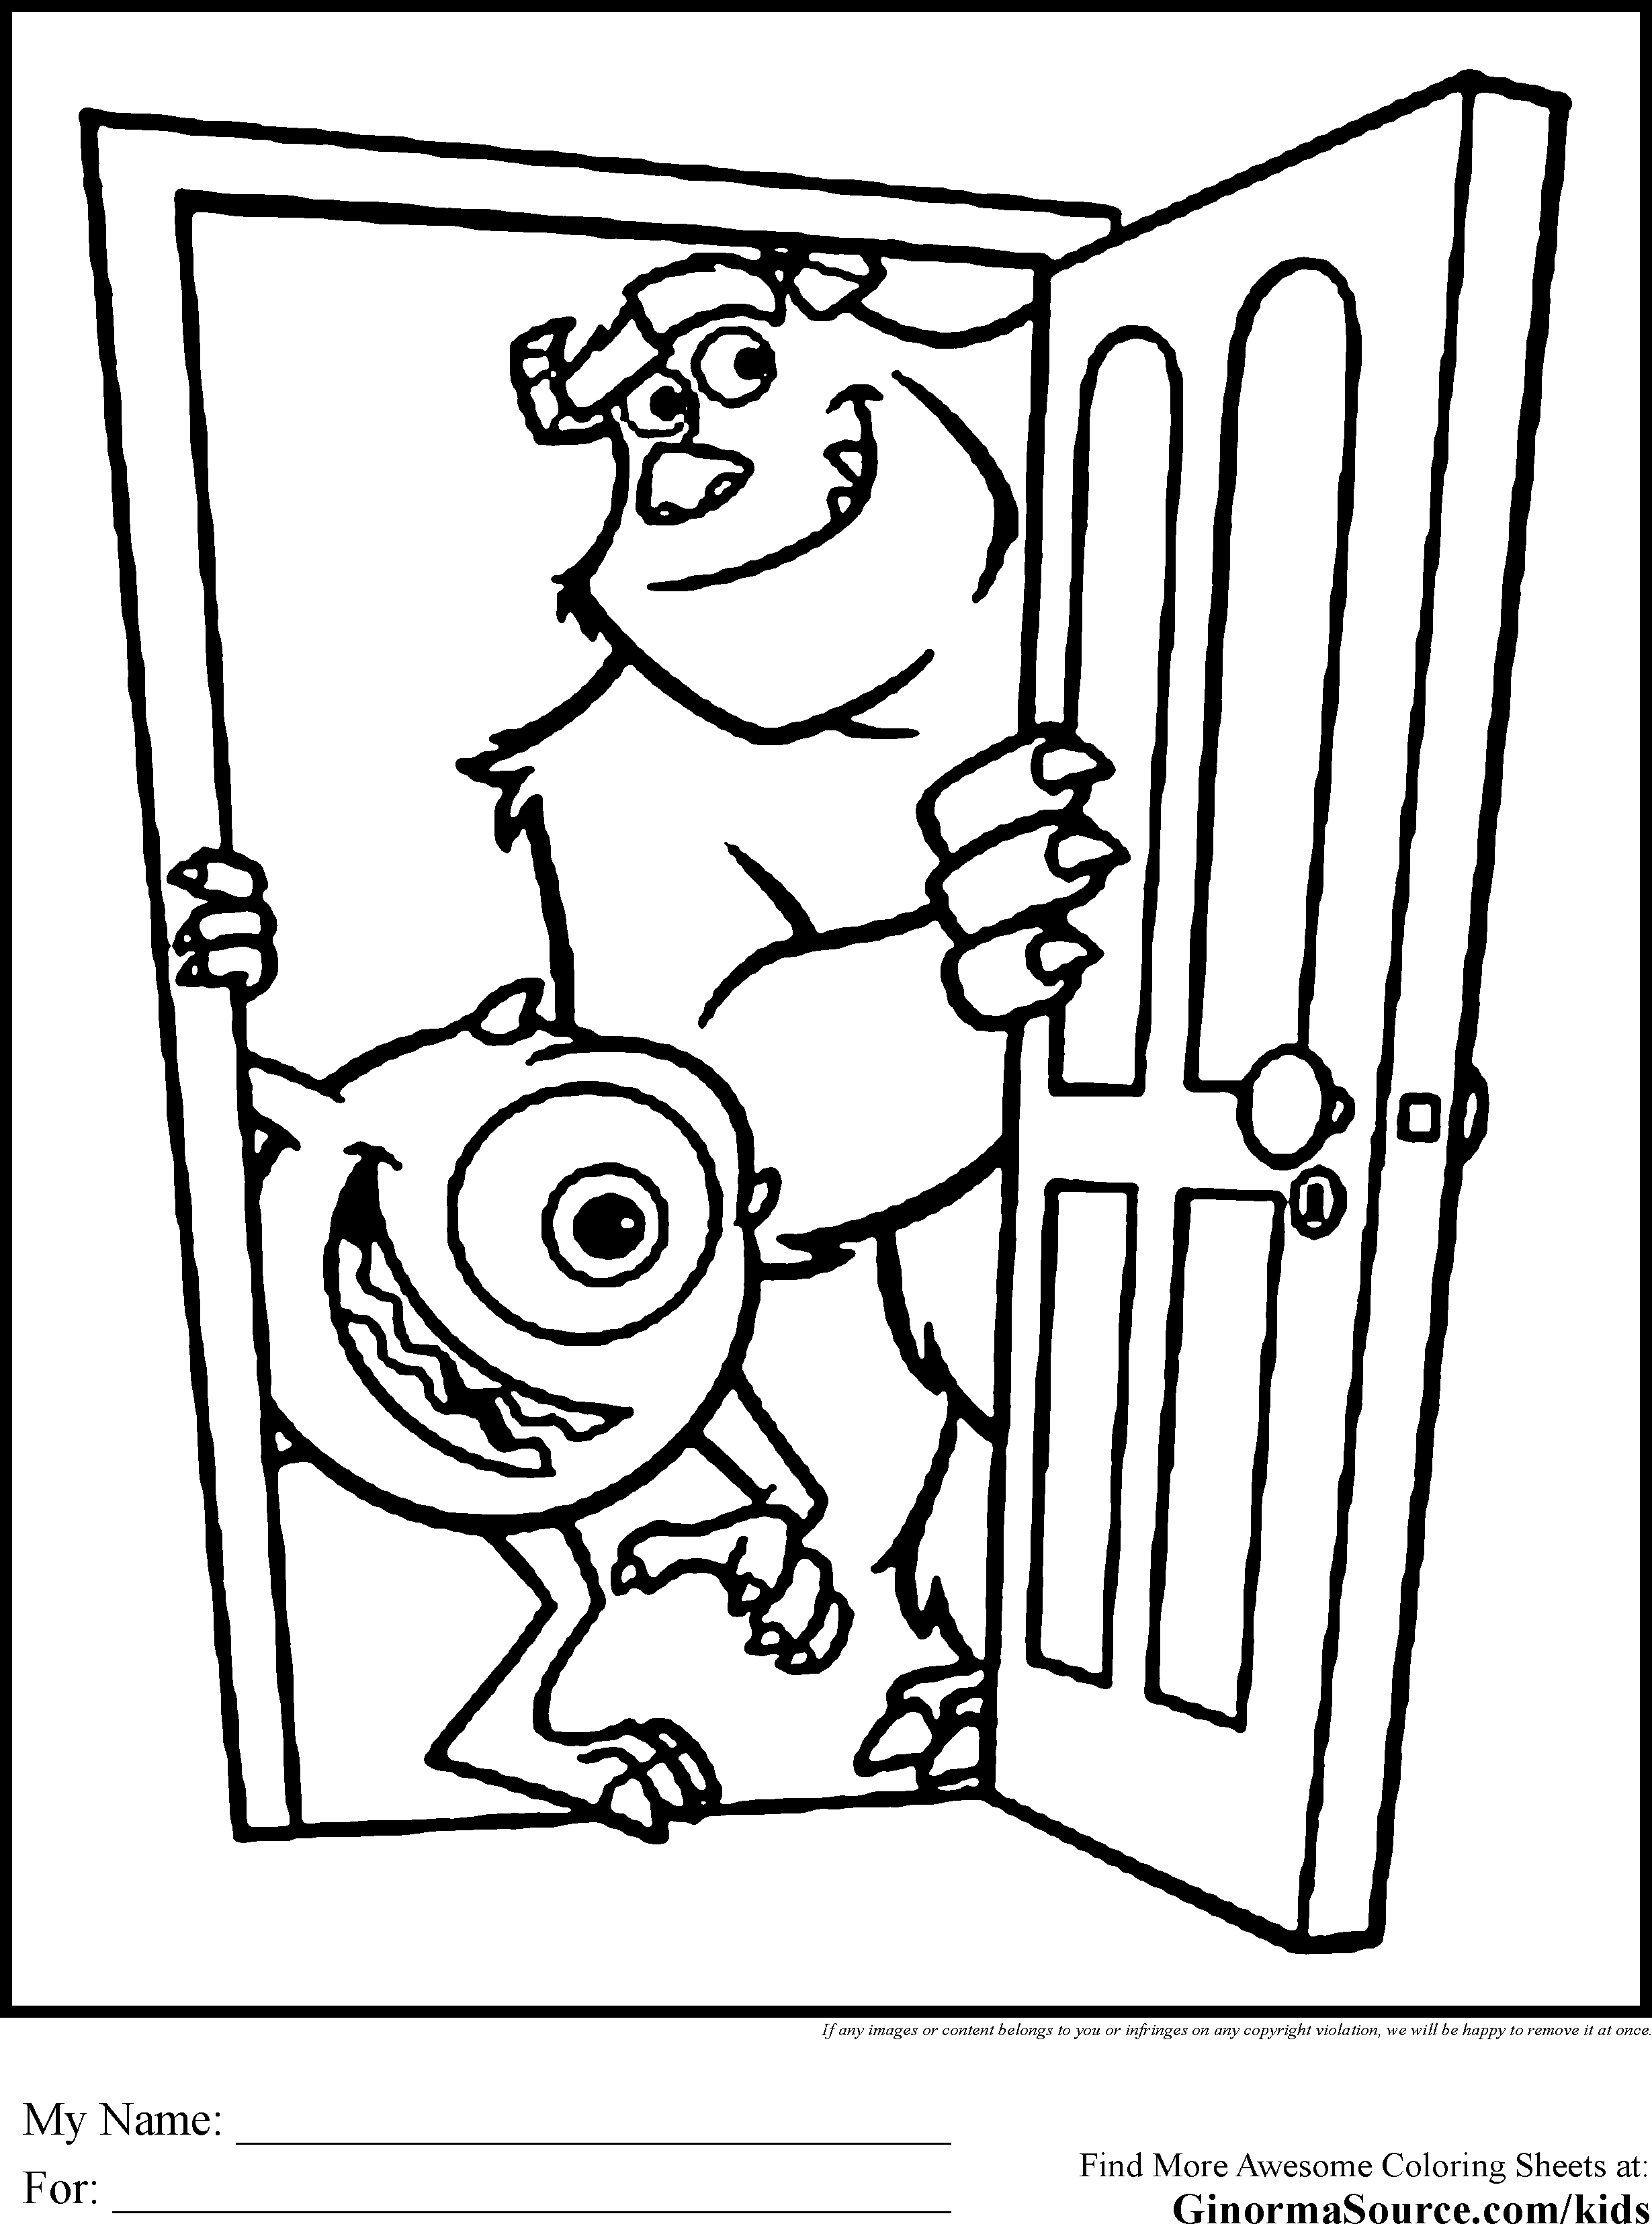 Monsters Inc Coloring Pages - GINORMAsource Kids